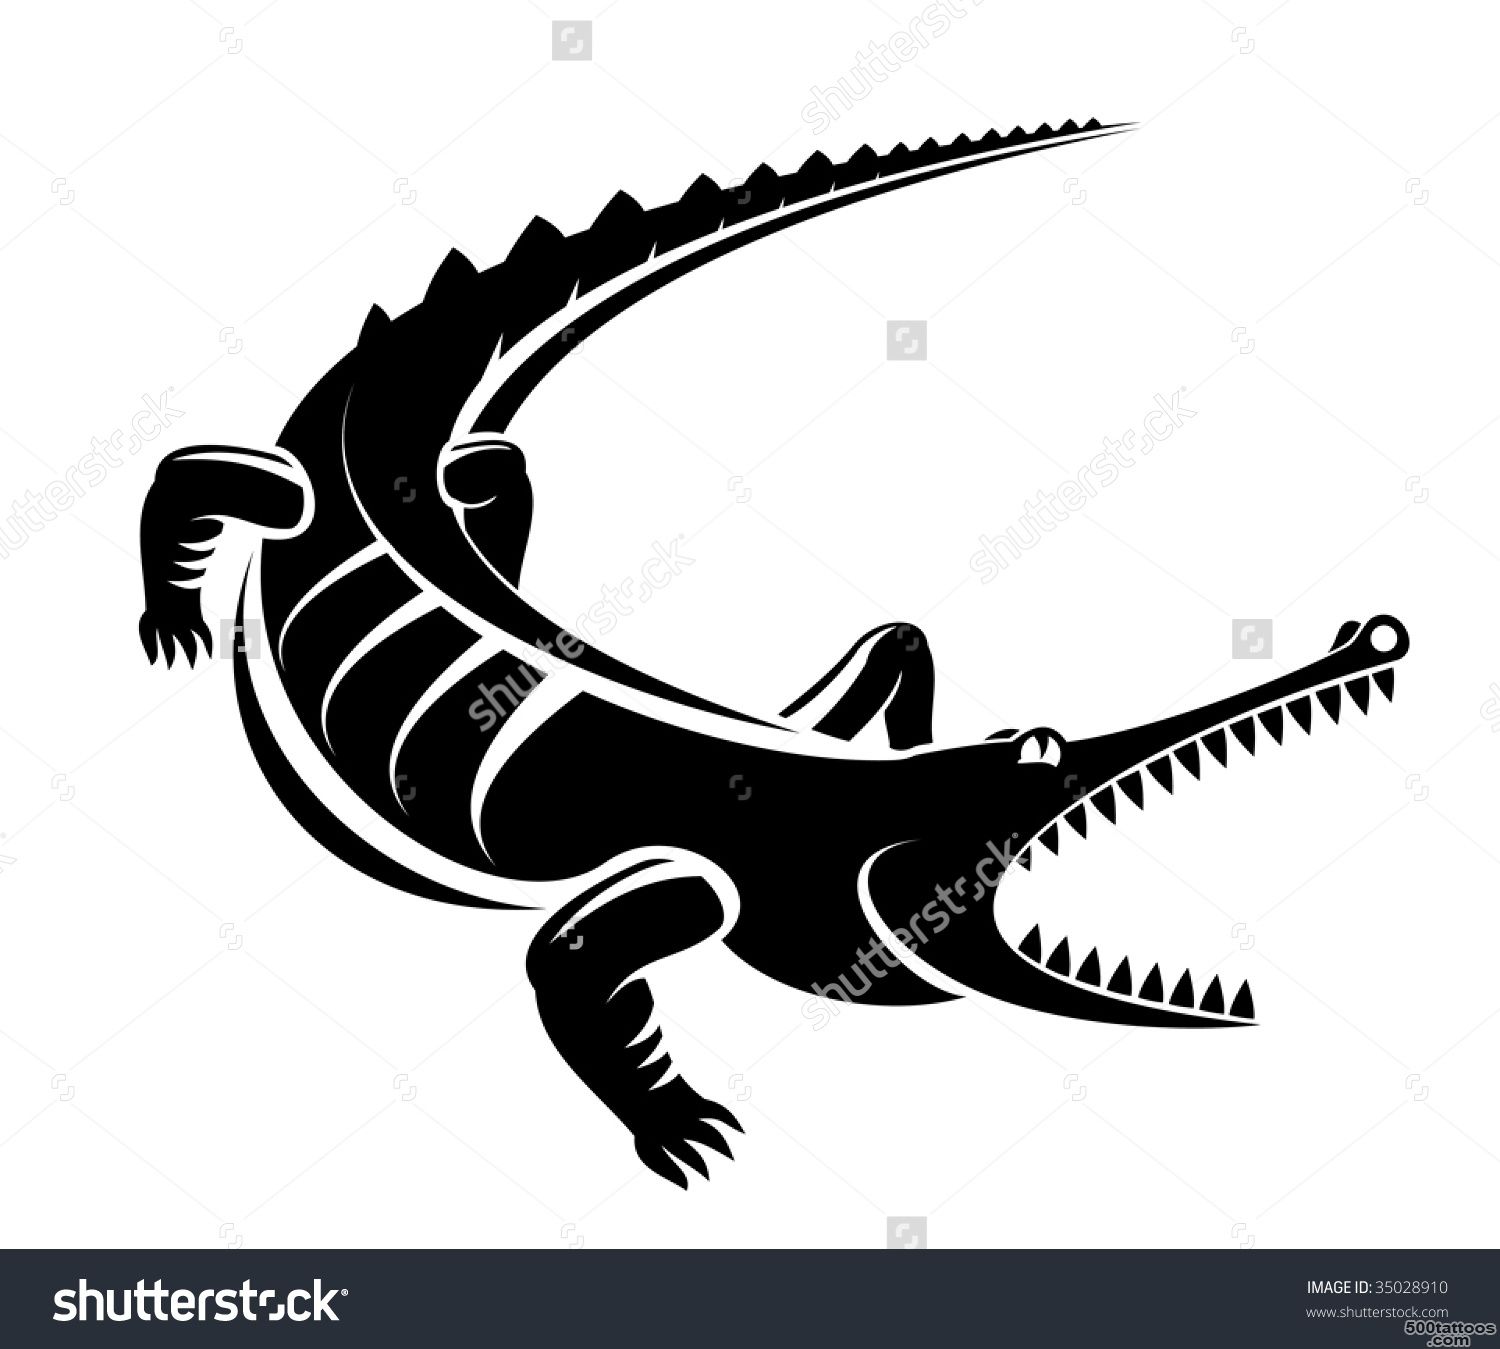 Black Crocodile Silhouette Isolated On White, For Mascot Or Tattoo ..._27